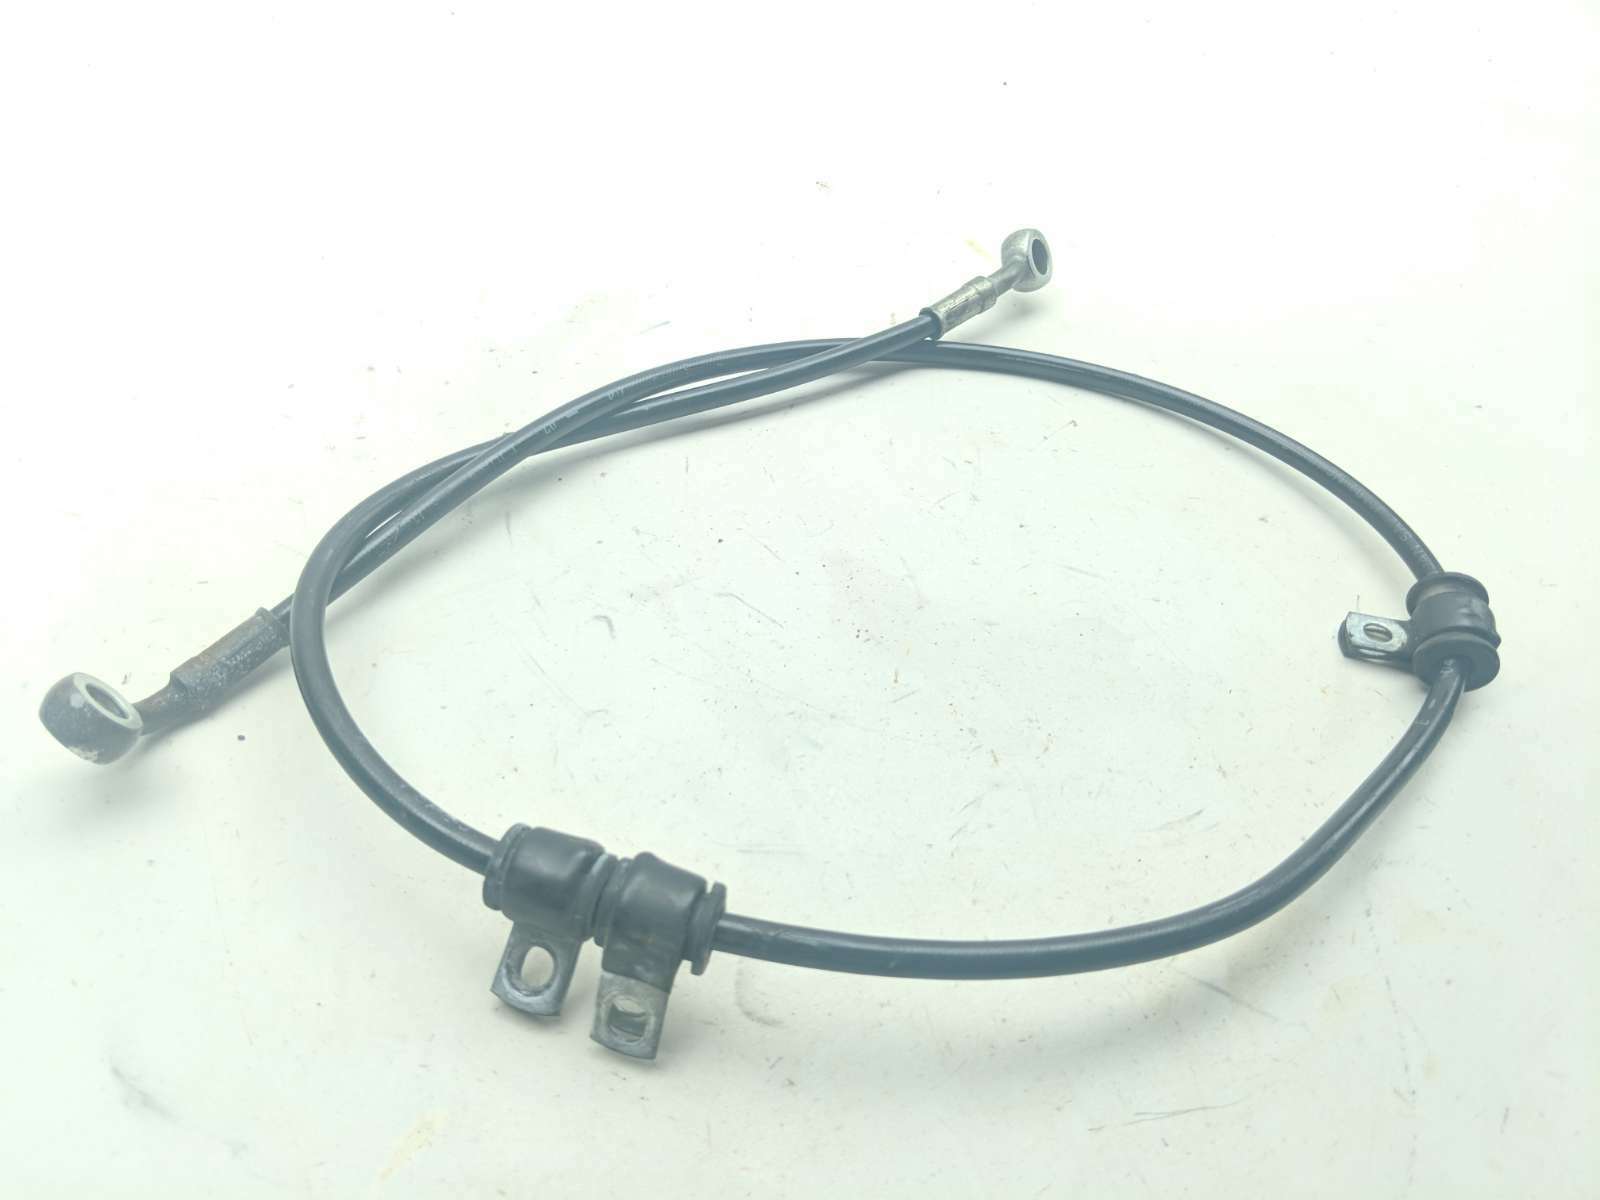 08 Harley Heritage Softail Classic FLSTC Rear Brake Cable Line Hose